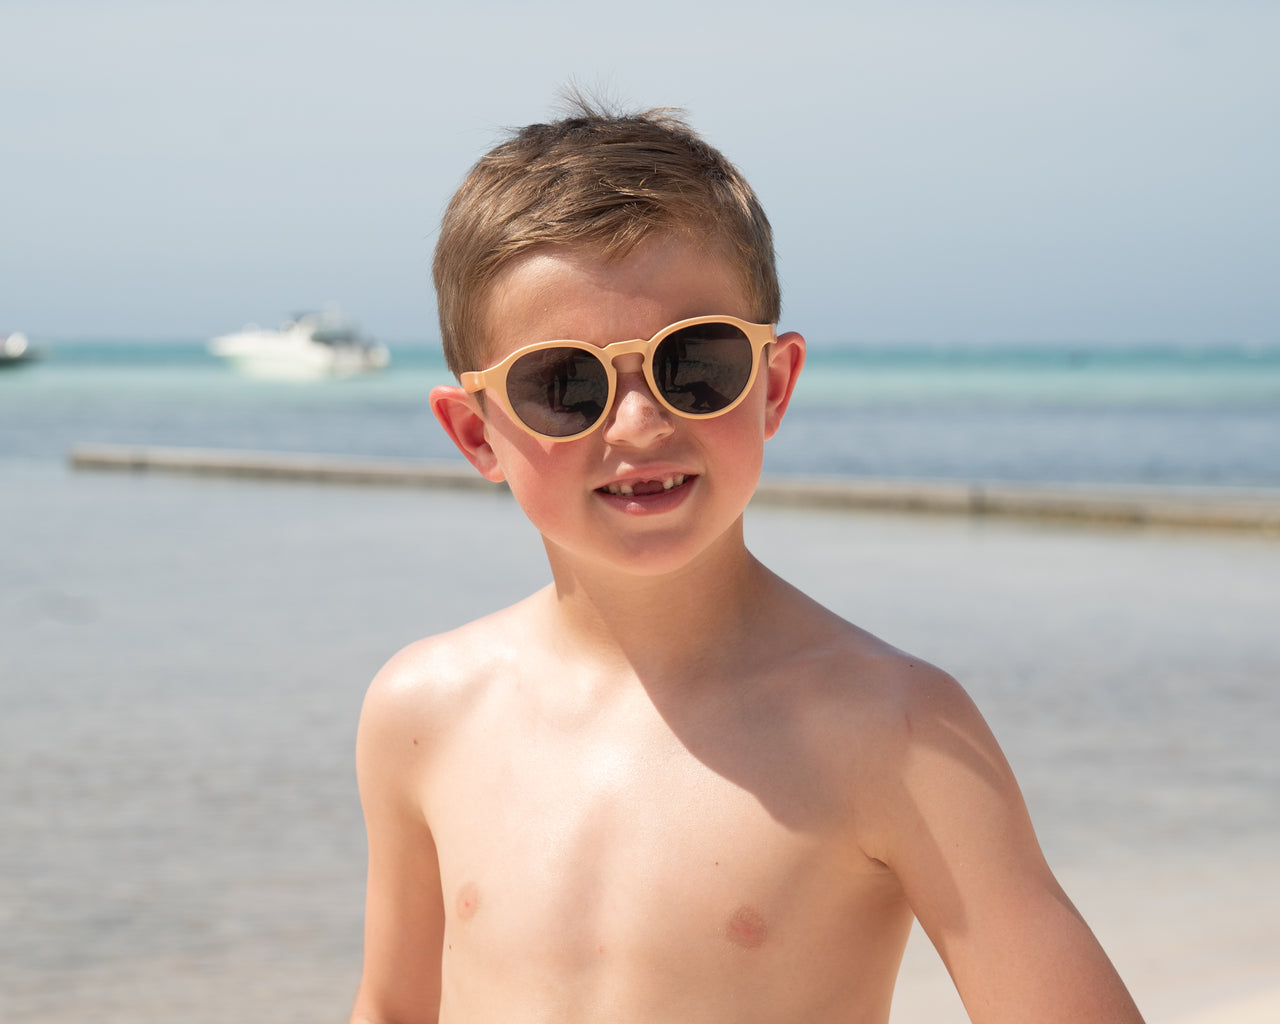 Go for the Gold! - Gold Round Frame Sunglasses for Kids